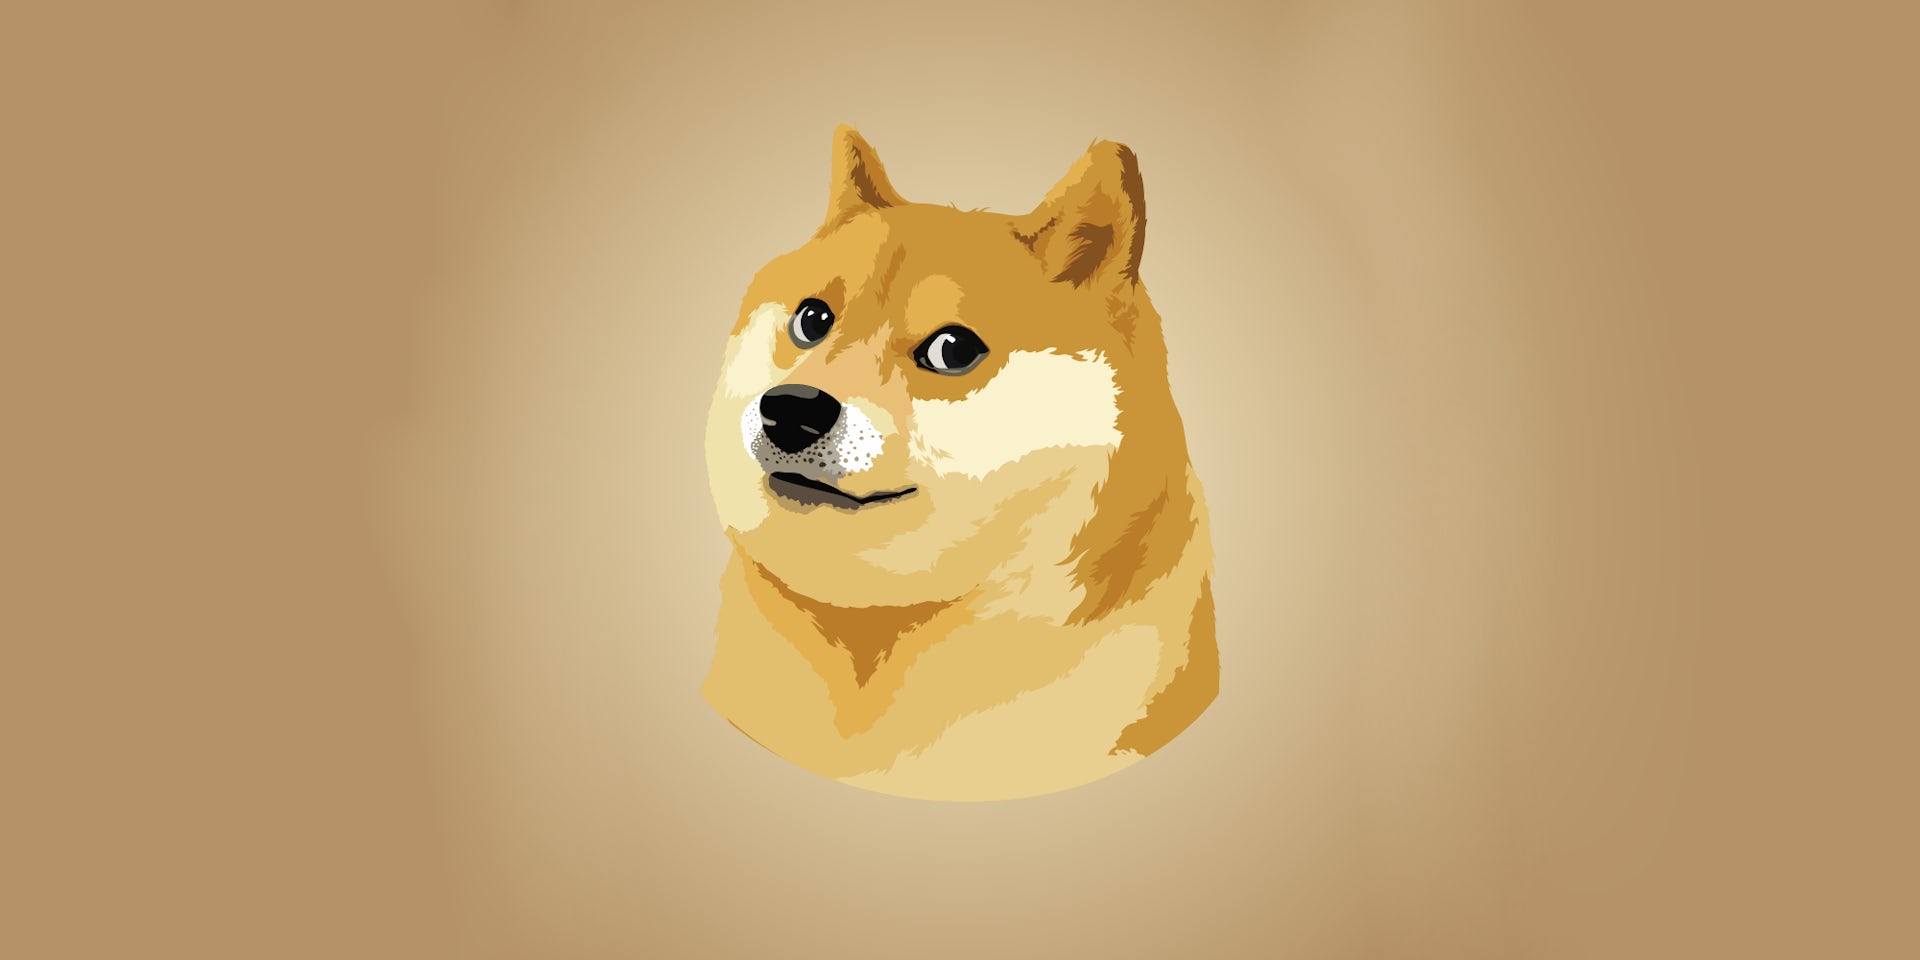 Doge Meme Royalty-Free Images, Stock Photos & Pictures | Shutterstock